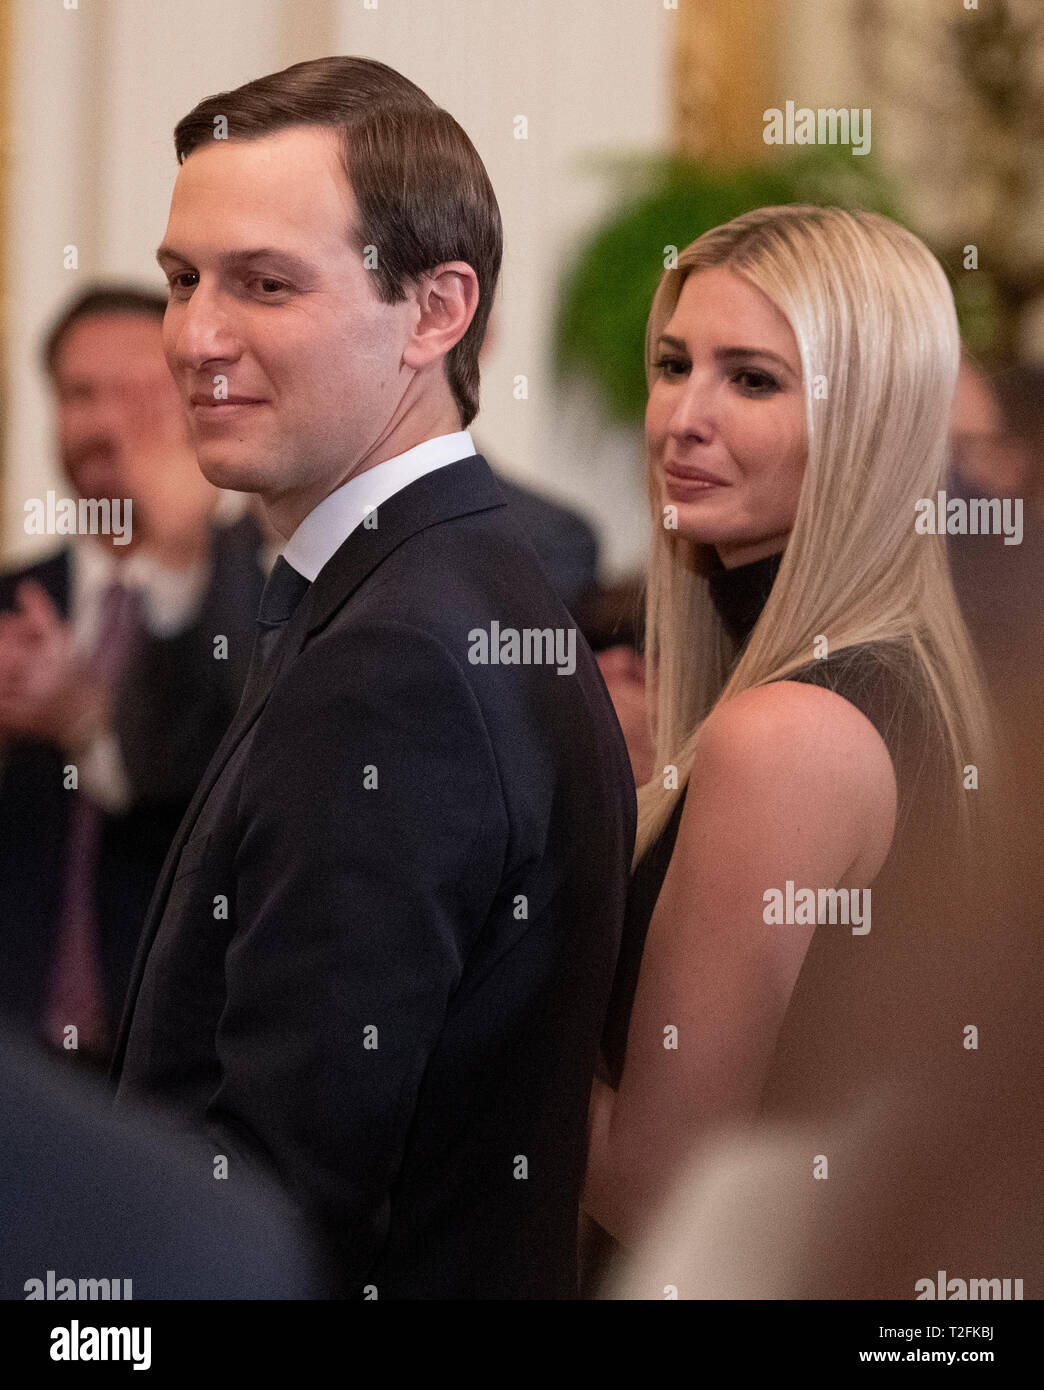 Senior Advisor Jared Kushner, left, and First Daughter and Advisor to the President Ivanka Trump, right, stand as United States President Donald J. Trump makes remarks during the 2019 Prison Reform Summit and First Step Act Celebration in the East Room of the White House in Washington, DC on Monday, April 1, 2019. Credit: Ron Sachs / CNP /MediaPunch Stock Photo